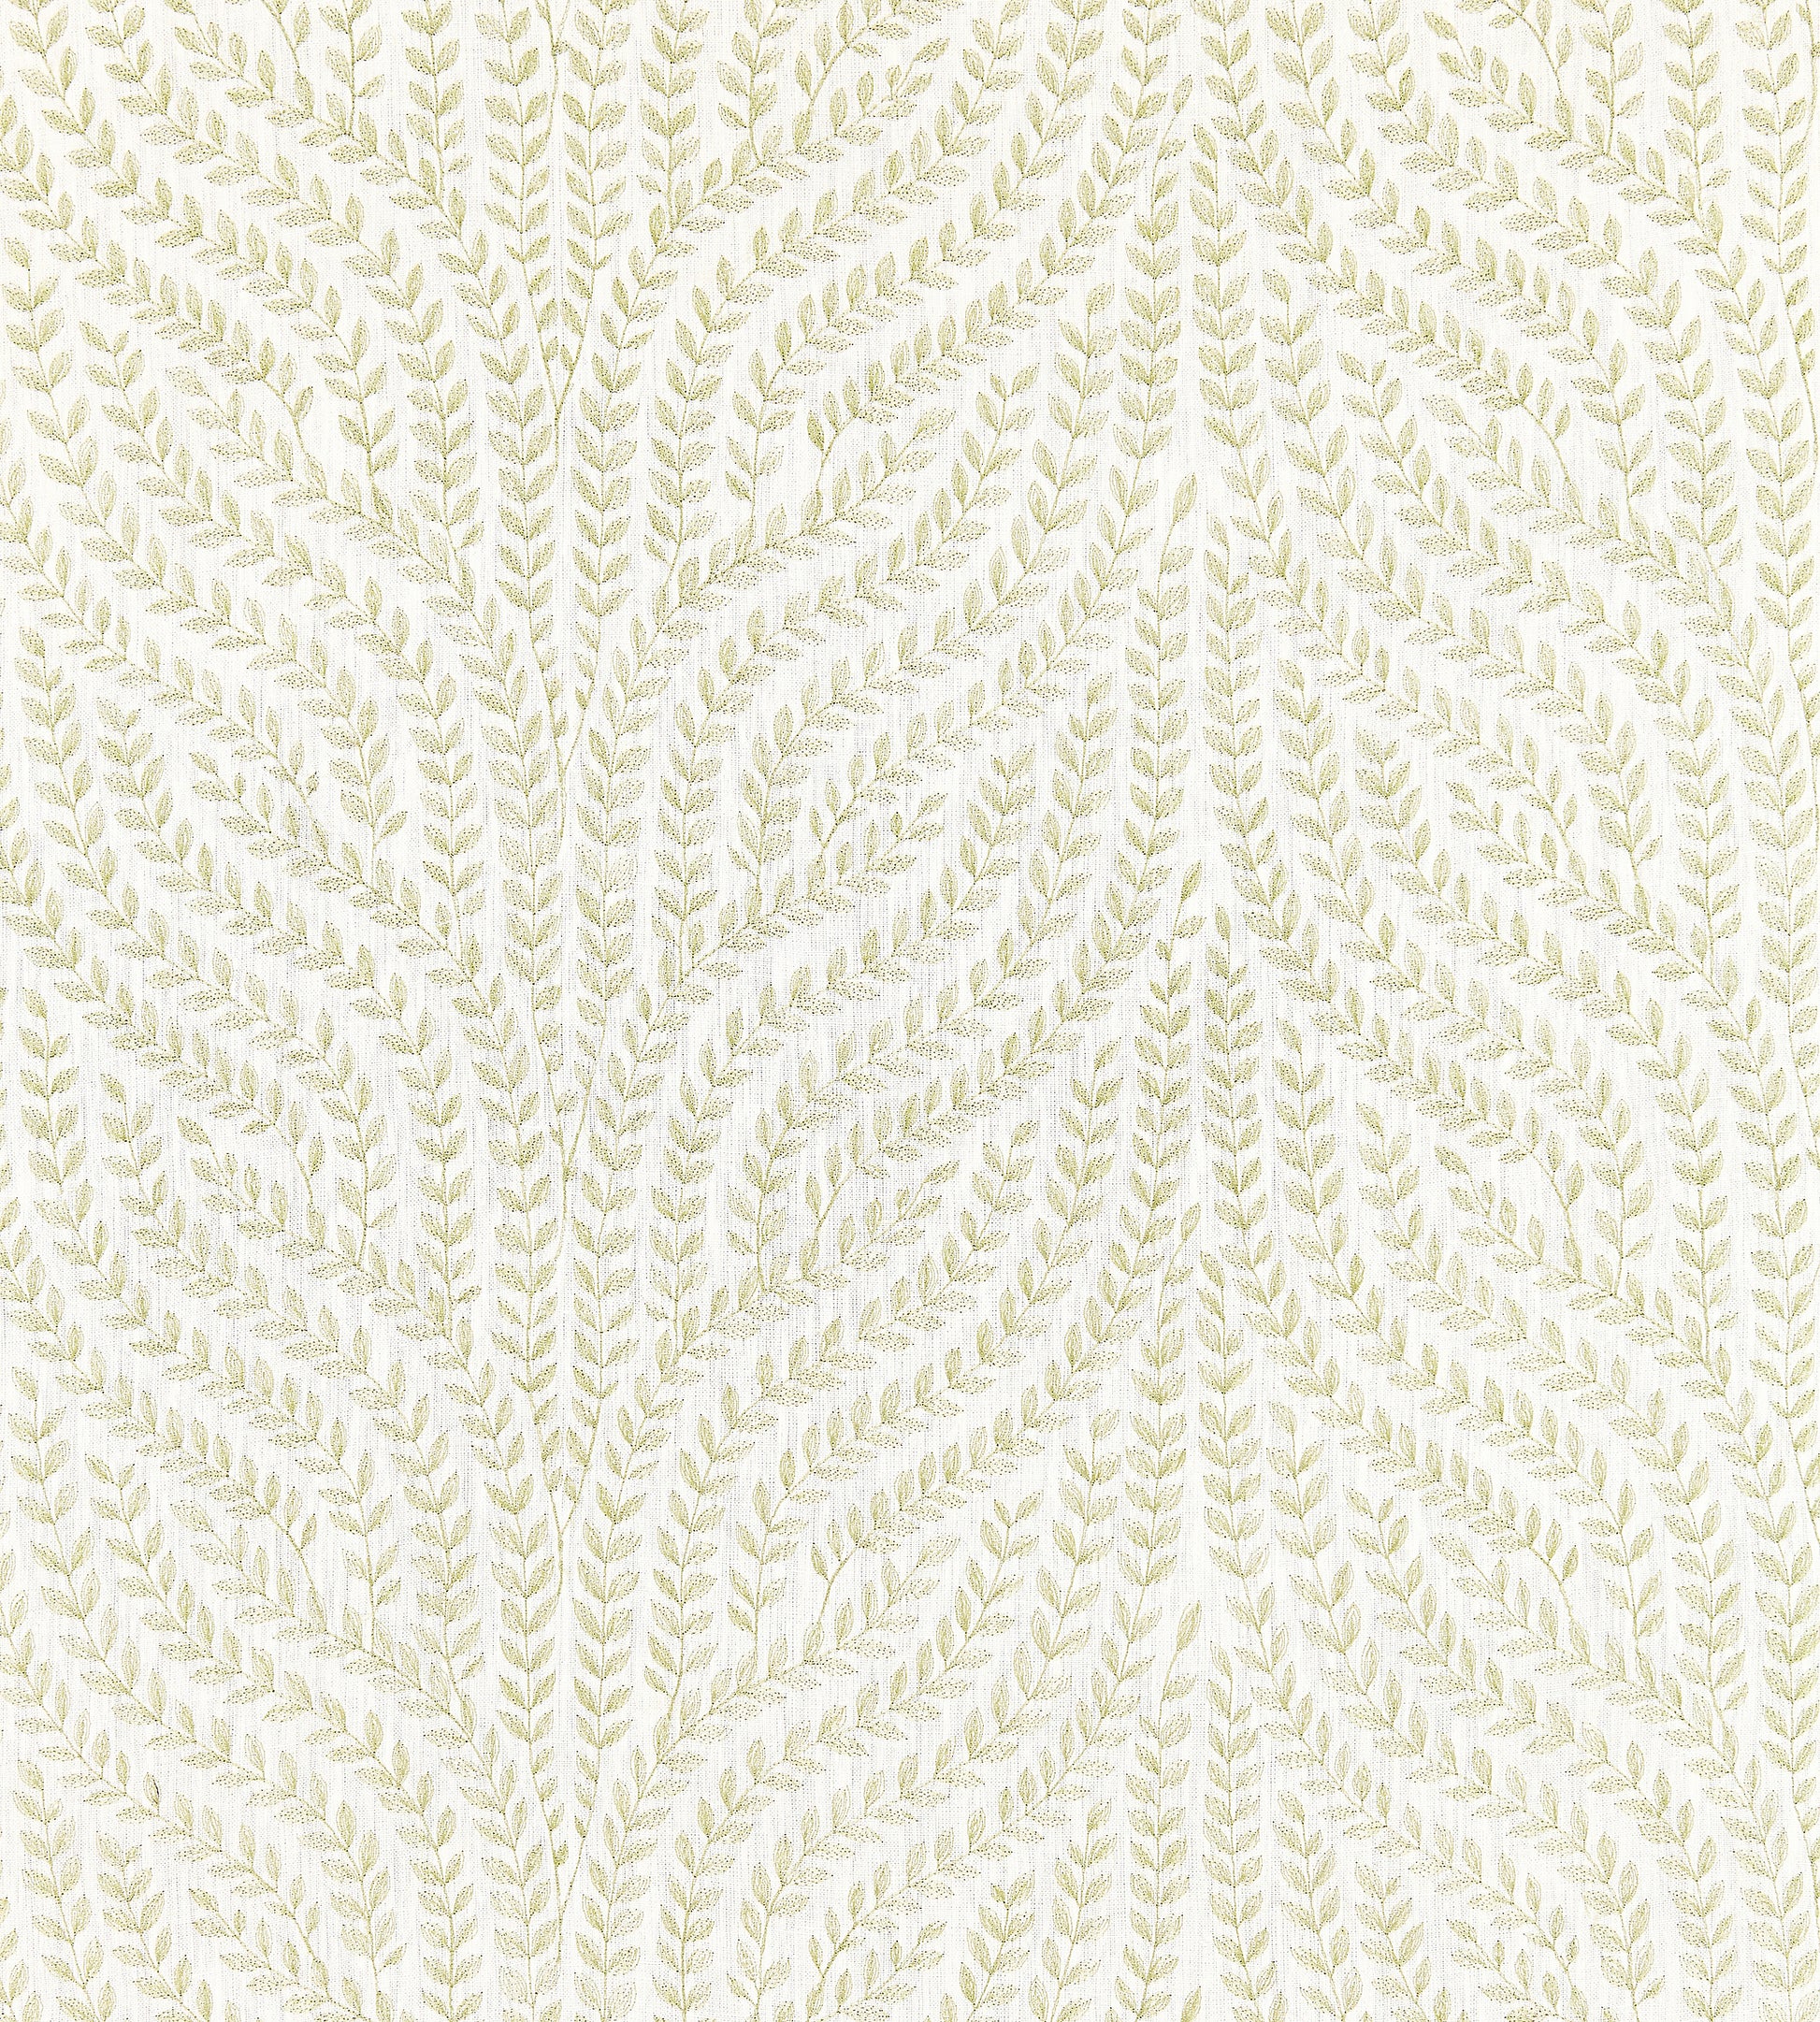 Purchase Scalamandre Fabric SKU SC 000227125, Willow Vine Embroidery Celery 1